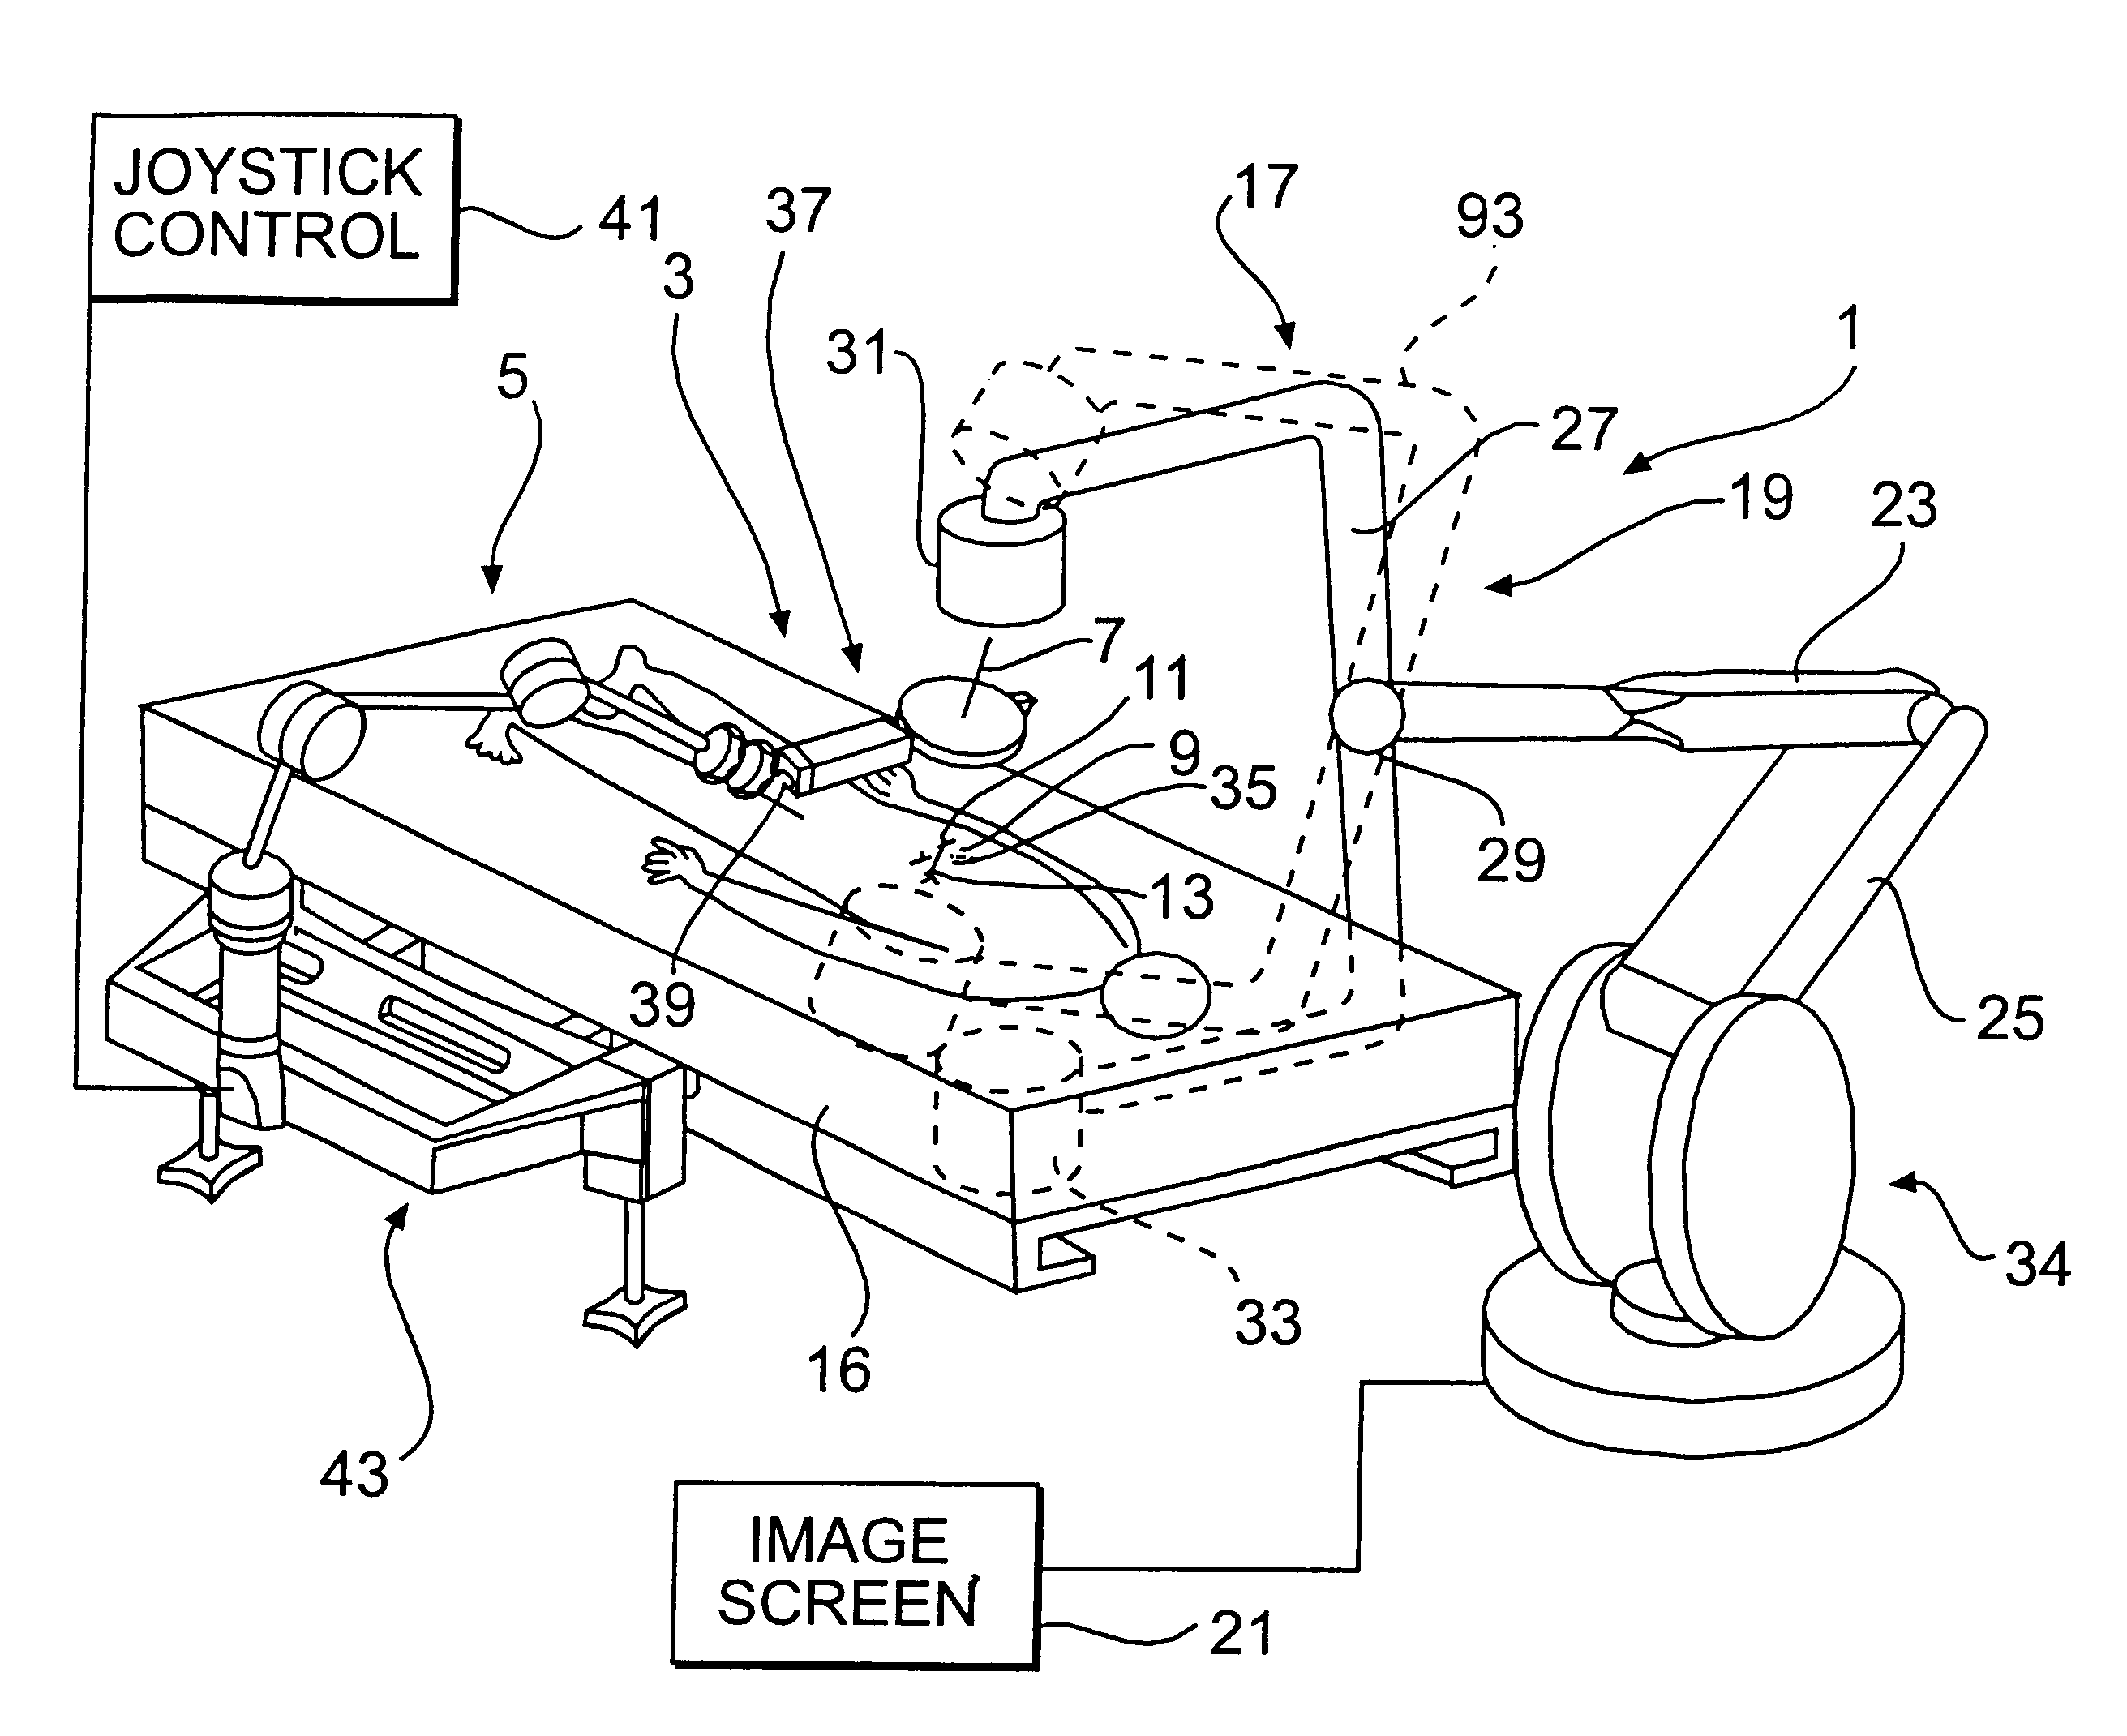 Friction transmission with axial loading and a radiolucent surgical needle driver